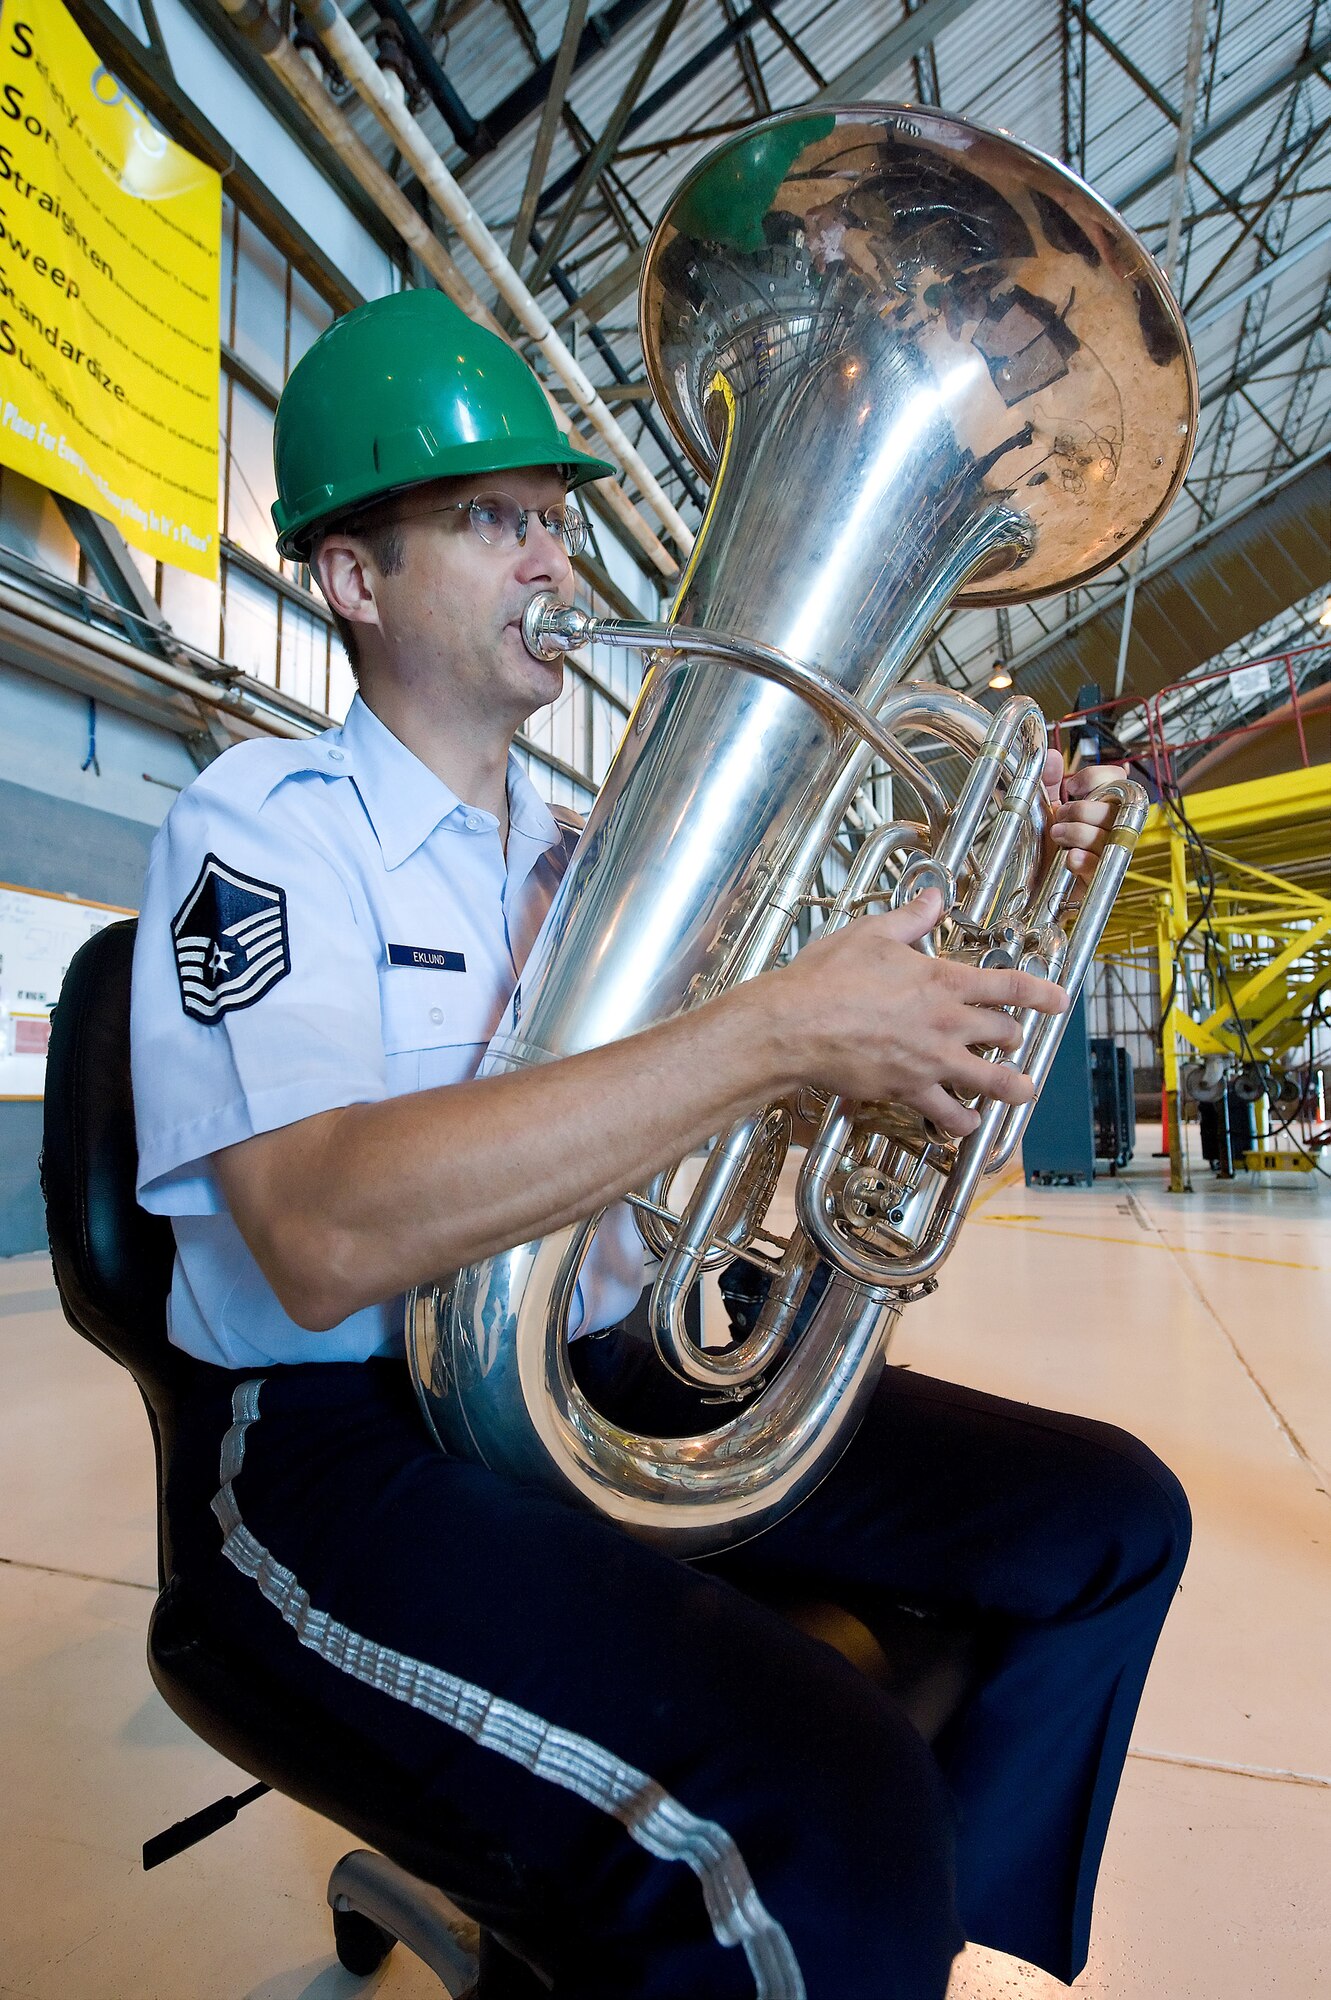 Master Sgt. Steve Eklund, member of the Heritage of America Band traveling ensemble Vector, plays the tuba during a performance at the Isochronal Inspection Dock at Dover Air Force Base, Del., June 15. Vector performed at various locations on Dover AFB June 15. (U.S. Air Force photo/Roland Balik)